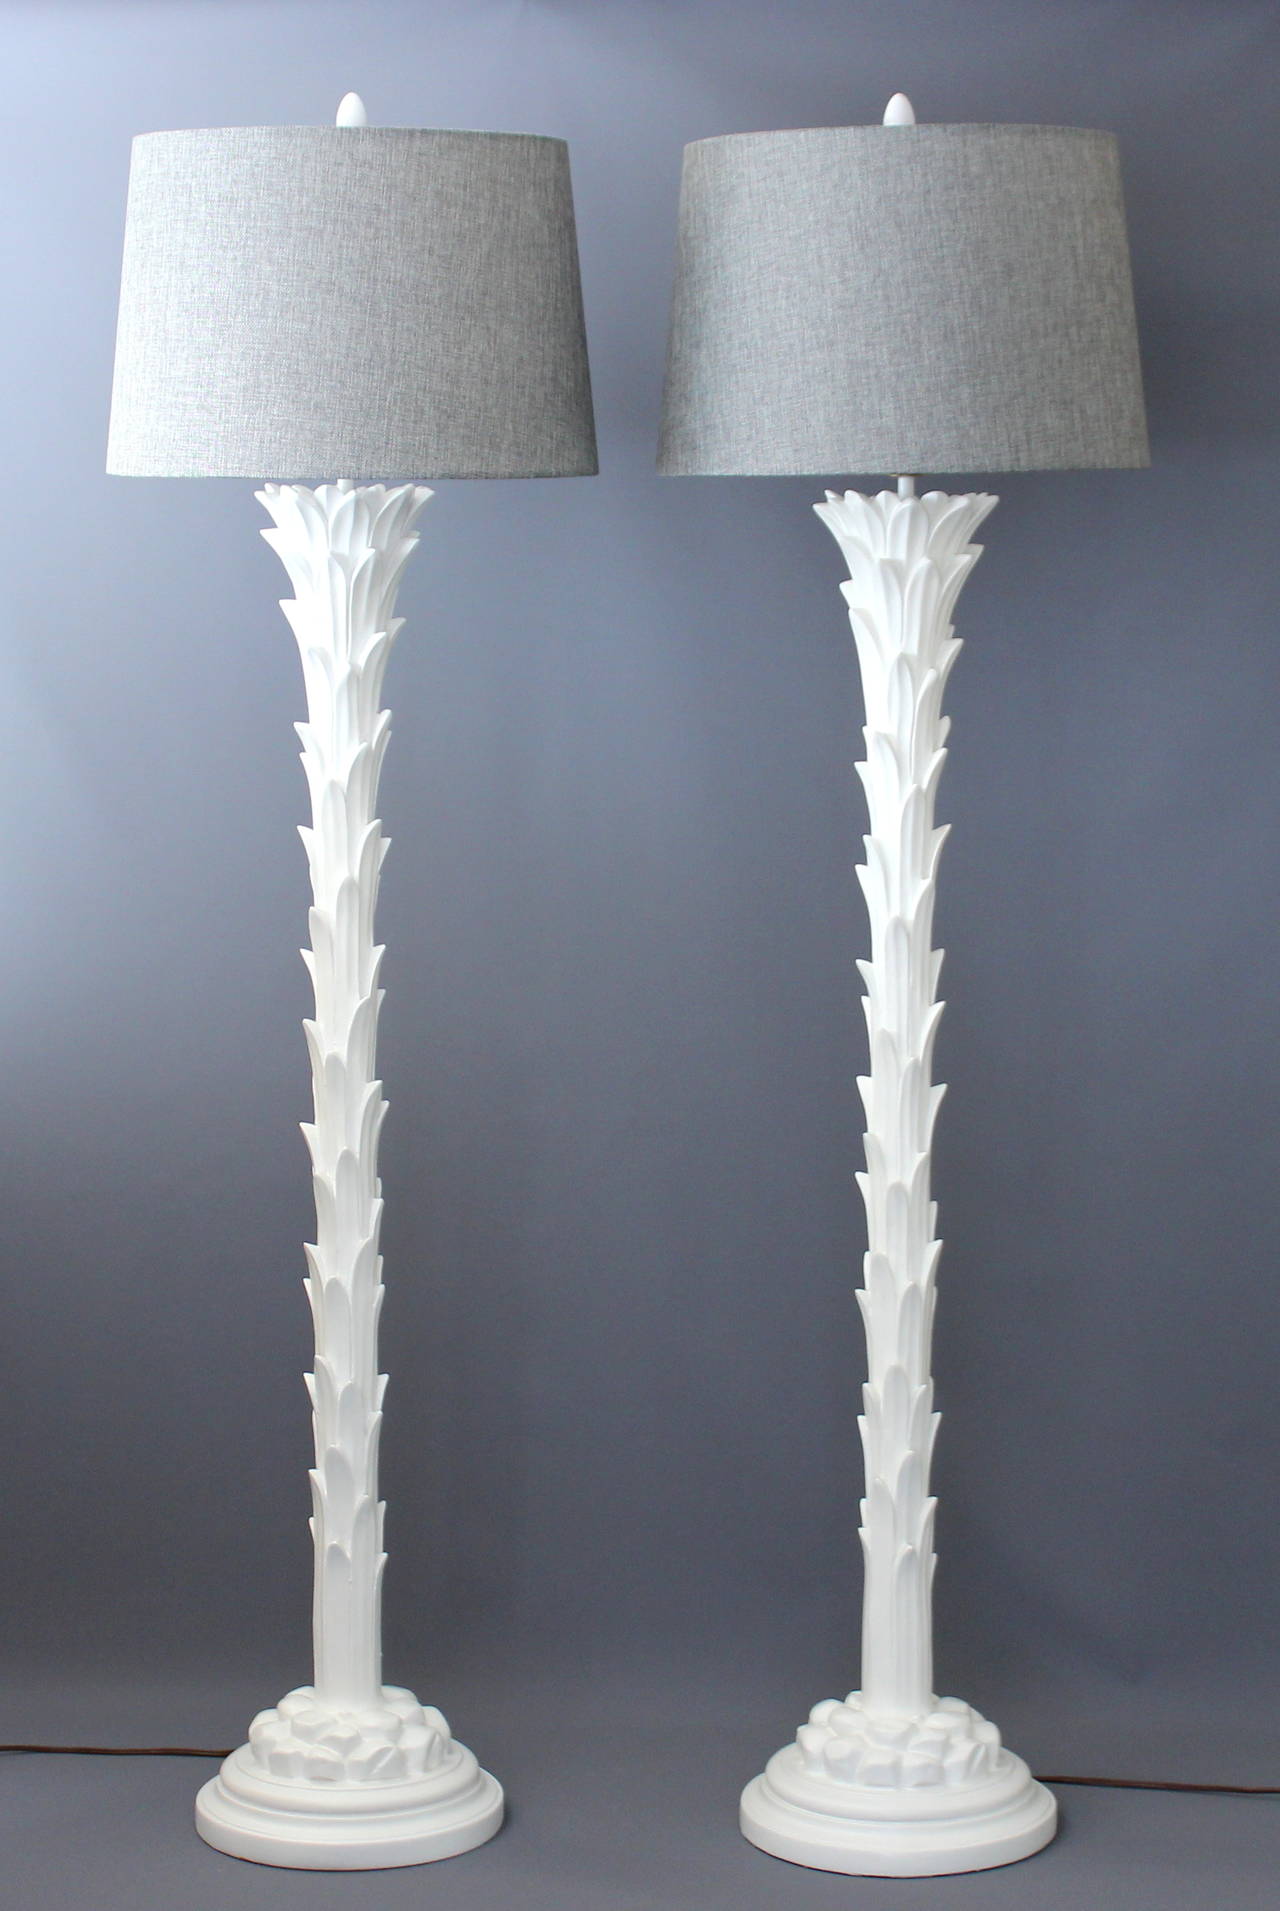 Pair of vintage plaster Chapman palm tree floor lamps in Serge Roche style, circa 1970. 54